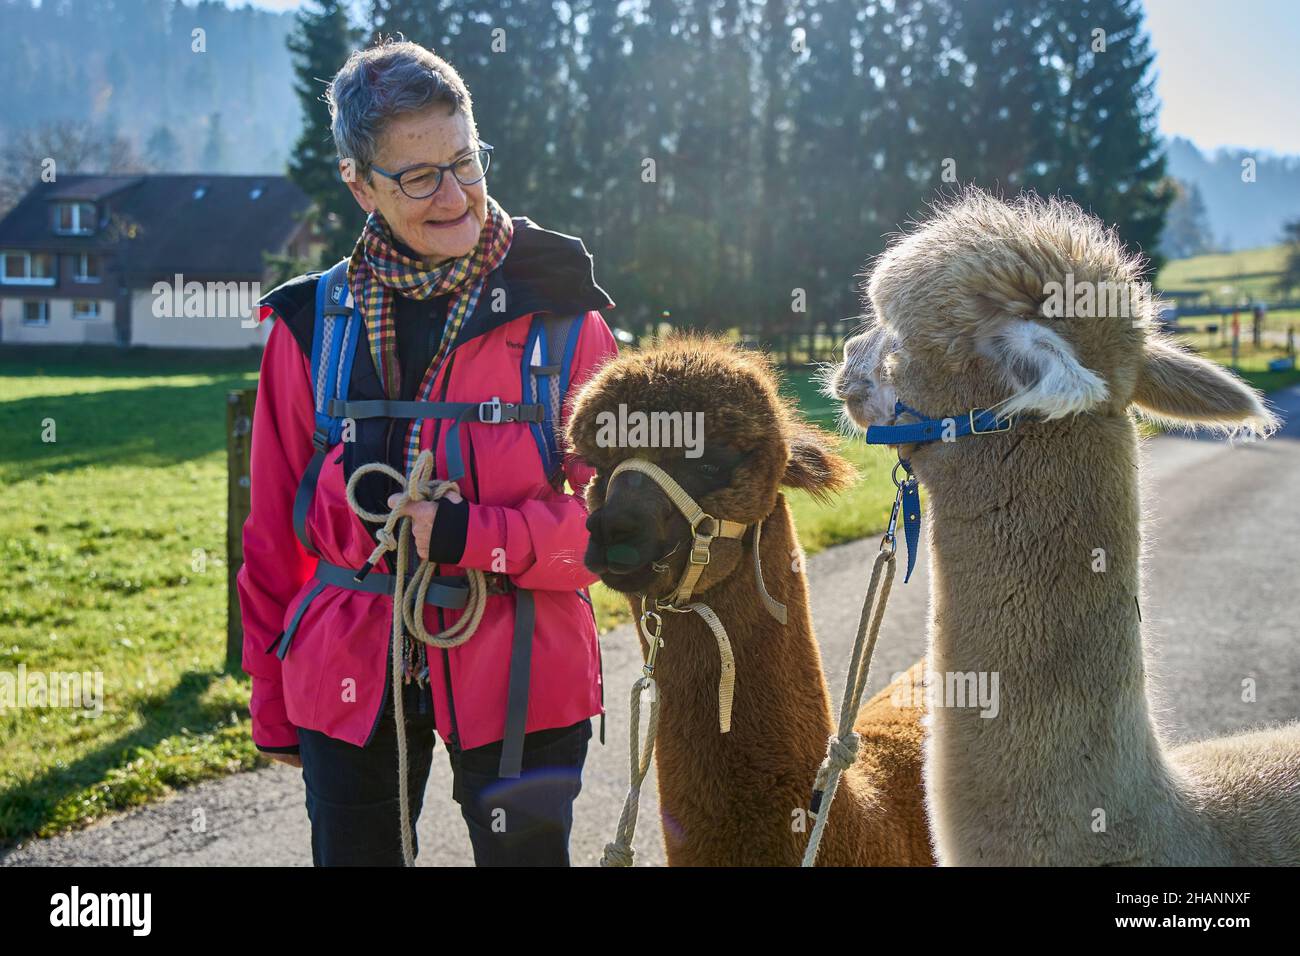 Woman In Red Jacket On Walk With Two Alpacas Beige And Brown, Keeping Eye Contact. In The Background Meadow Trees And House. Bauma Zurich Oberland Swi Stock Photo